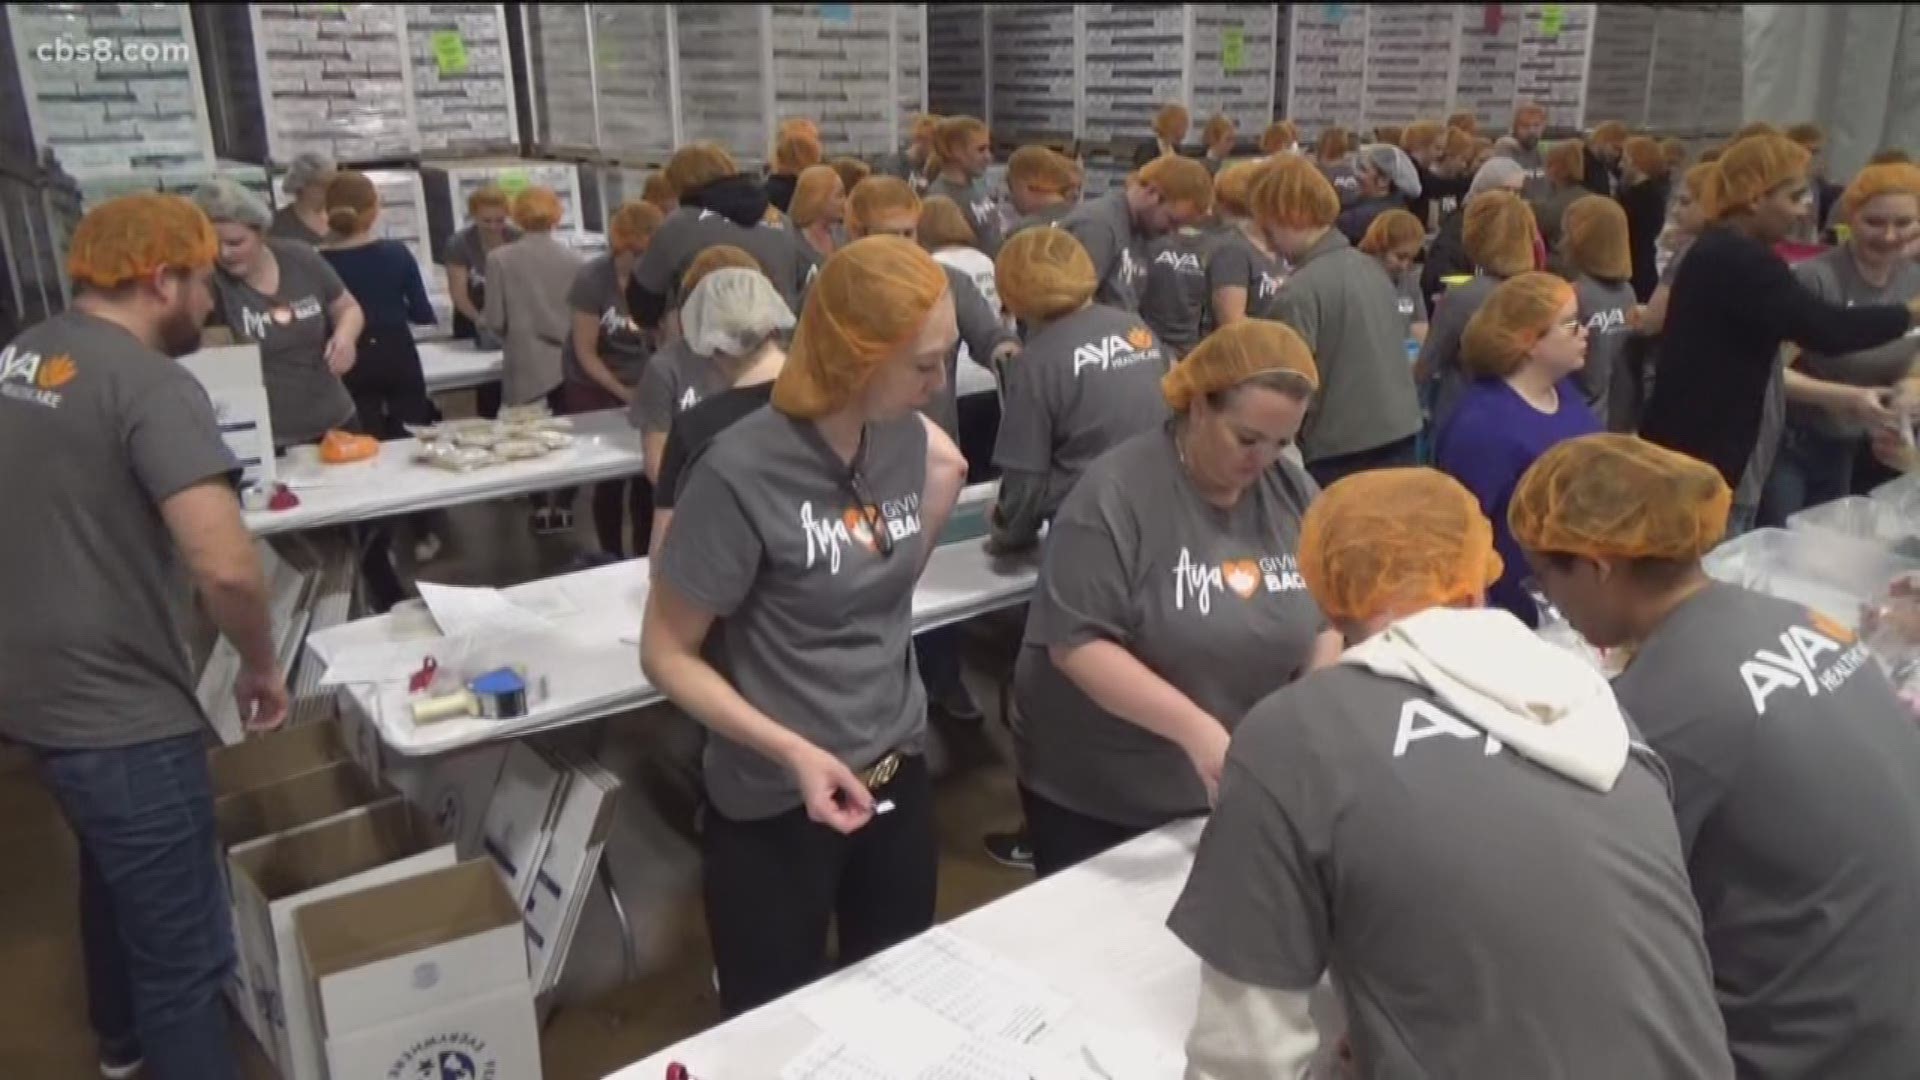 One in 6 children are estimated to go hungry in San Diego County. One company helped to provide the next meal for thousands of families in need.